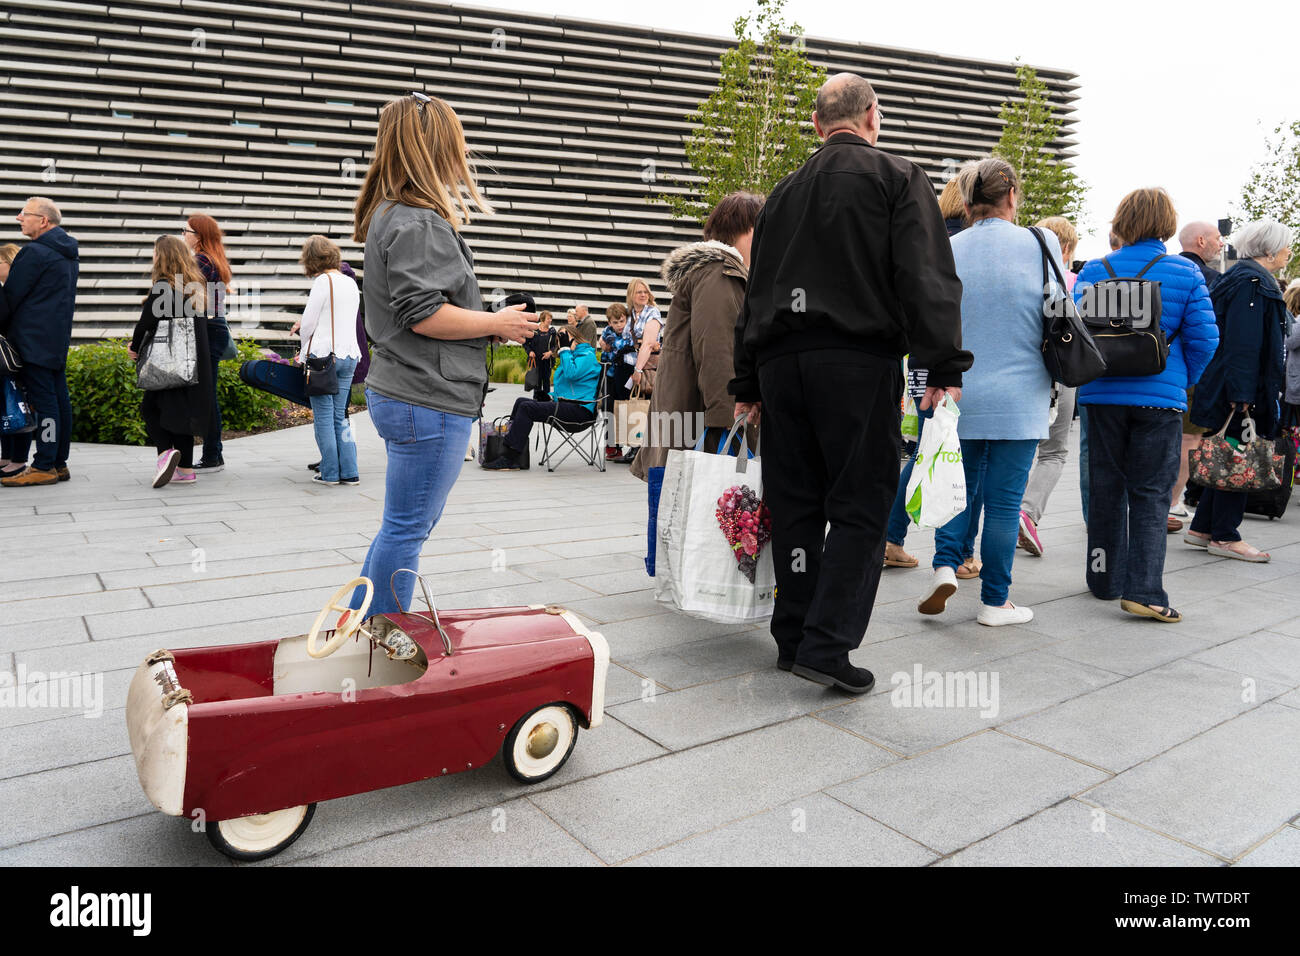 Dundee, Scotland, UK. 23 June 2019. The BBC Antiques Roadshow TV programme is aiming on location t the new V&A Museum in Dundee today. Long queues formed as members of the public arrived with their collectables to have them appraised and valued by the Antiques Roadshow experts. Select items and their owners were chosen to be filmed for the show. Credit: Iain Masterton/Alamy Live News Stock Photo